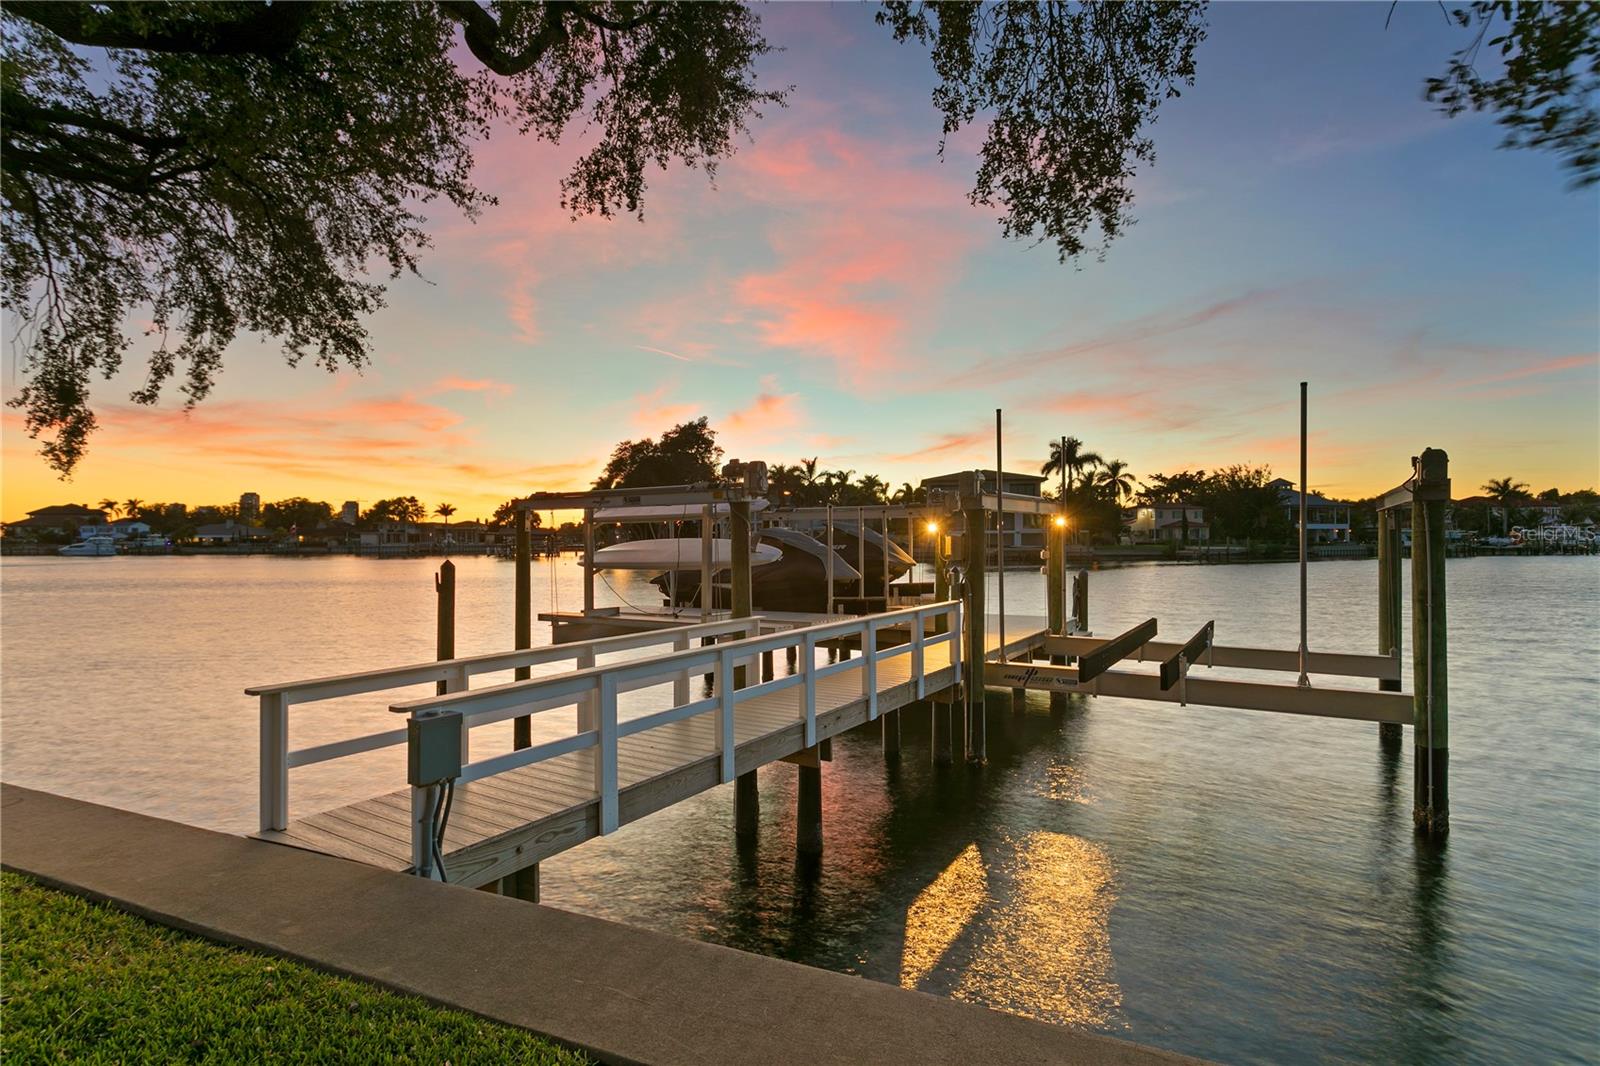 This updated dock was built by Speeler and has a Neptune 24,000 lb G6 Super Fast boat lift and jet ski lift.